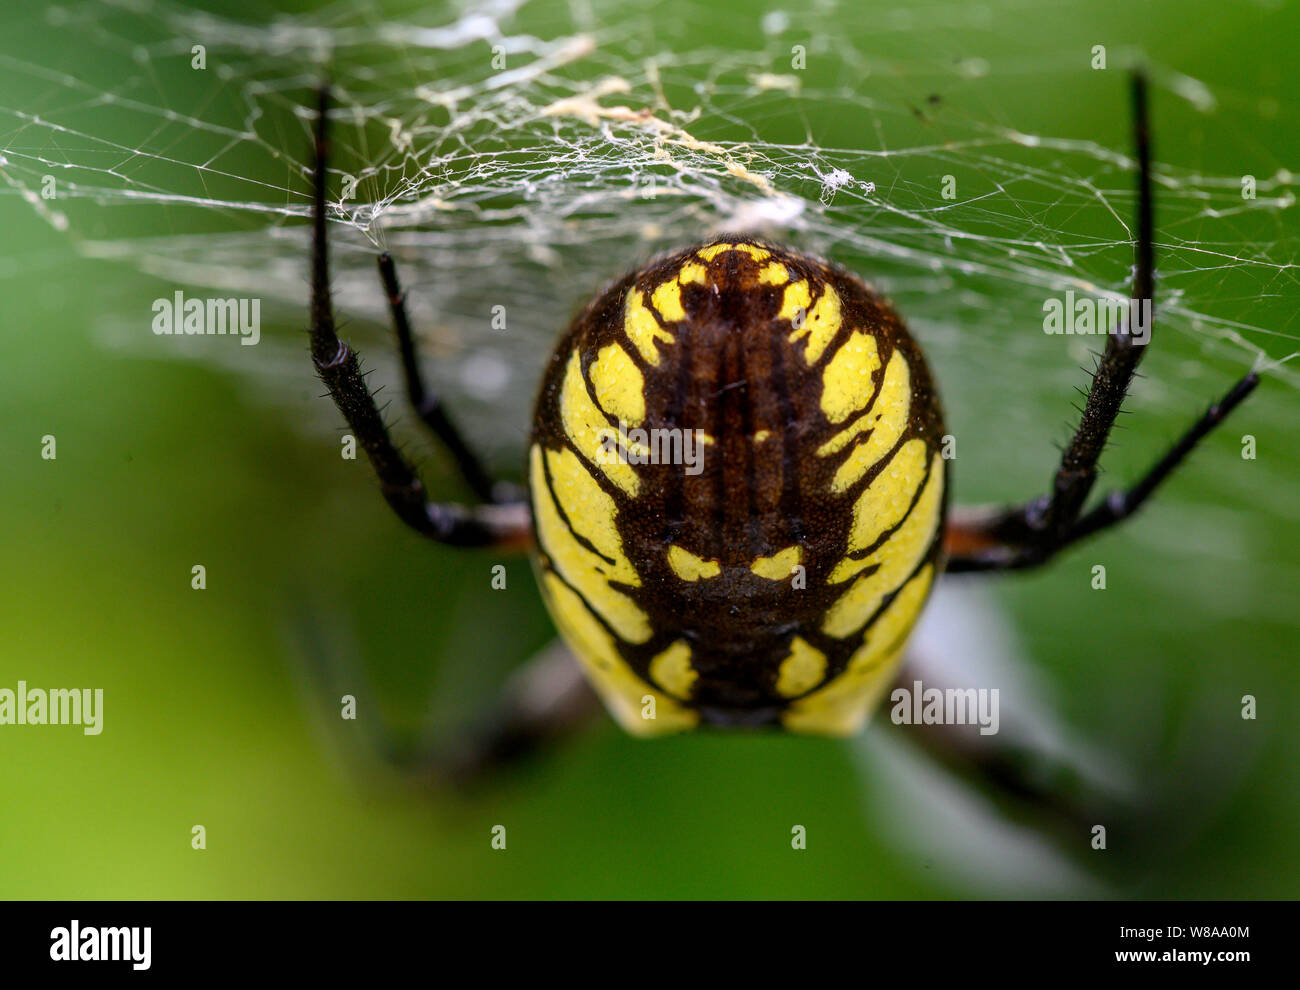 Black and Yellow Garden Spider  NC State Extension Publications